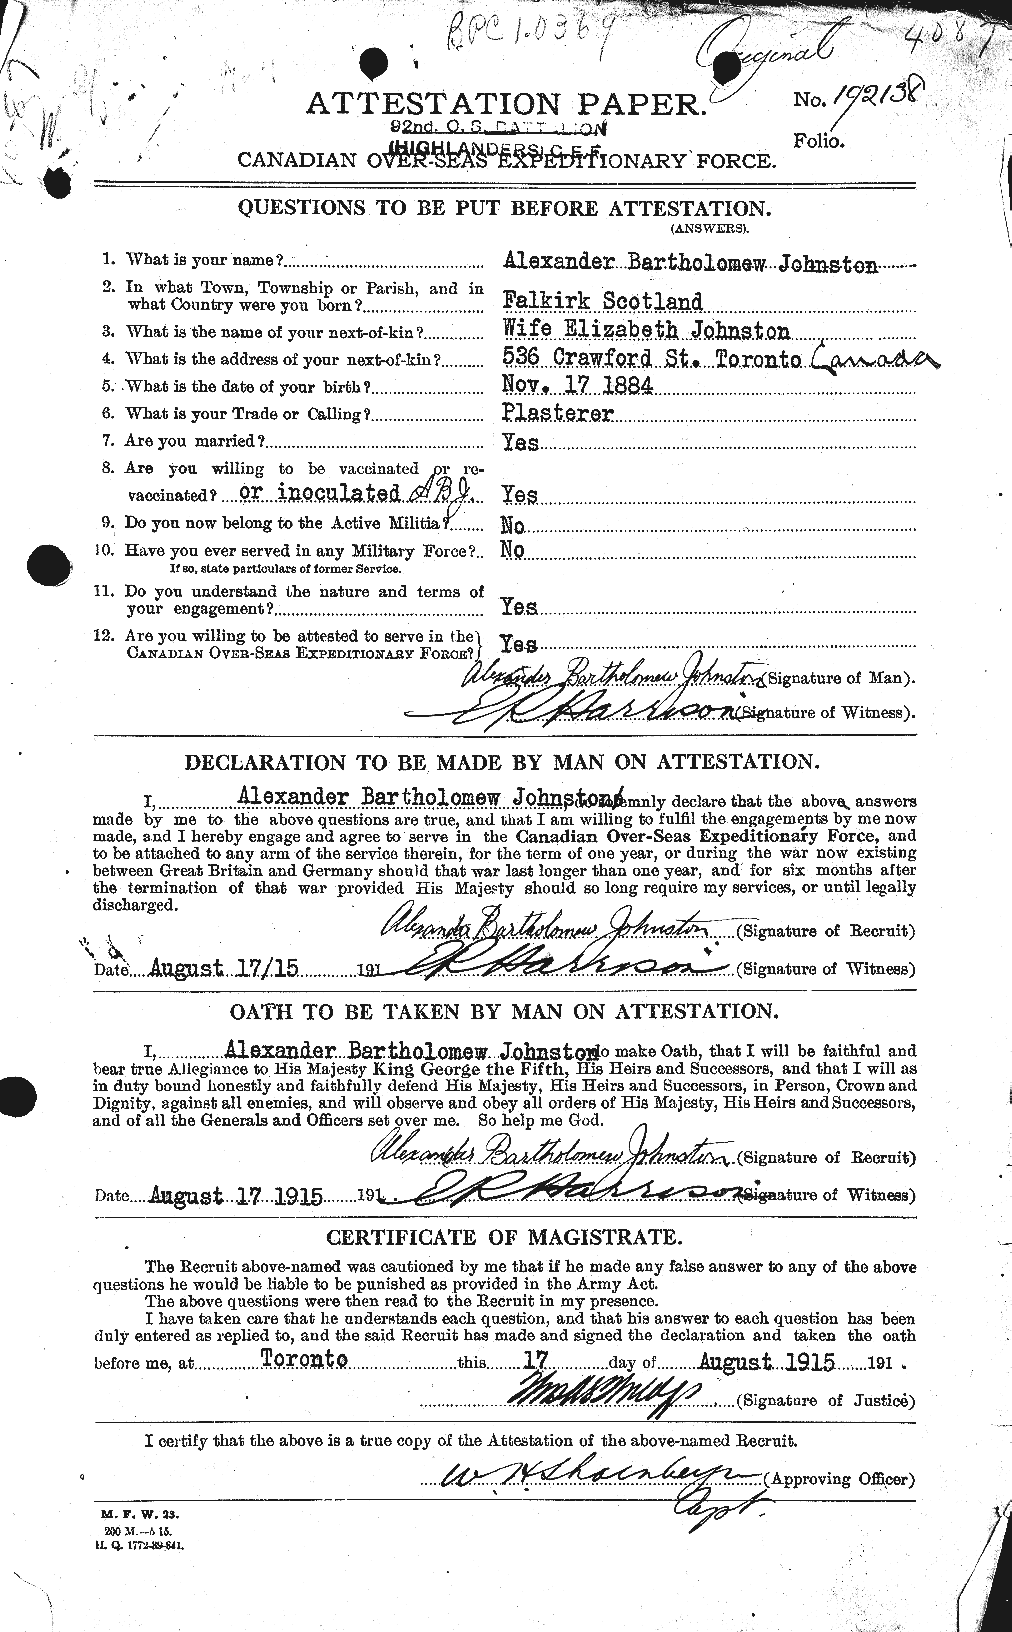 Personnel Records of the First World War - CEF 420966a